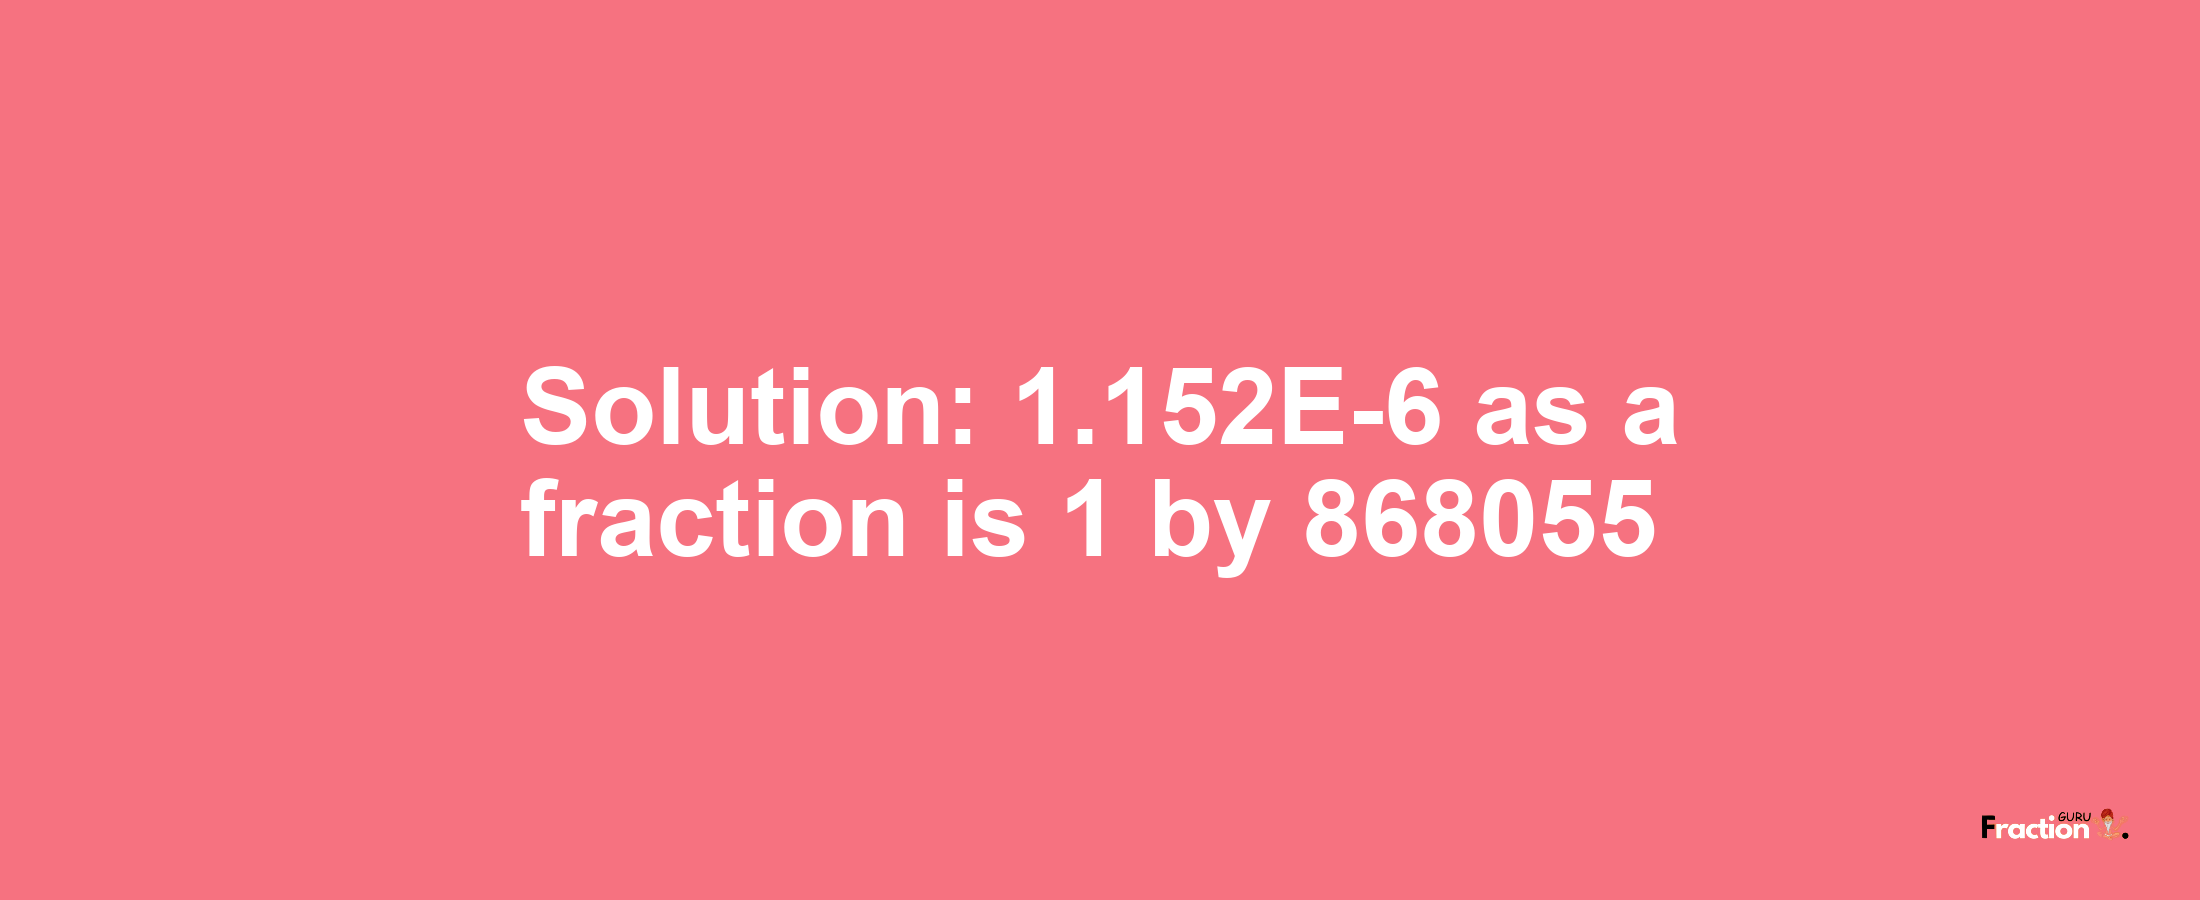 Solution:1.152E-6 as a fraction is 1/868055